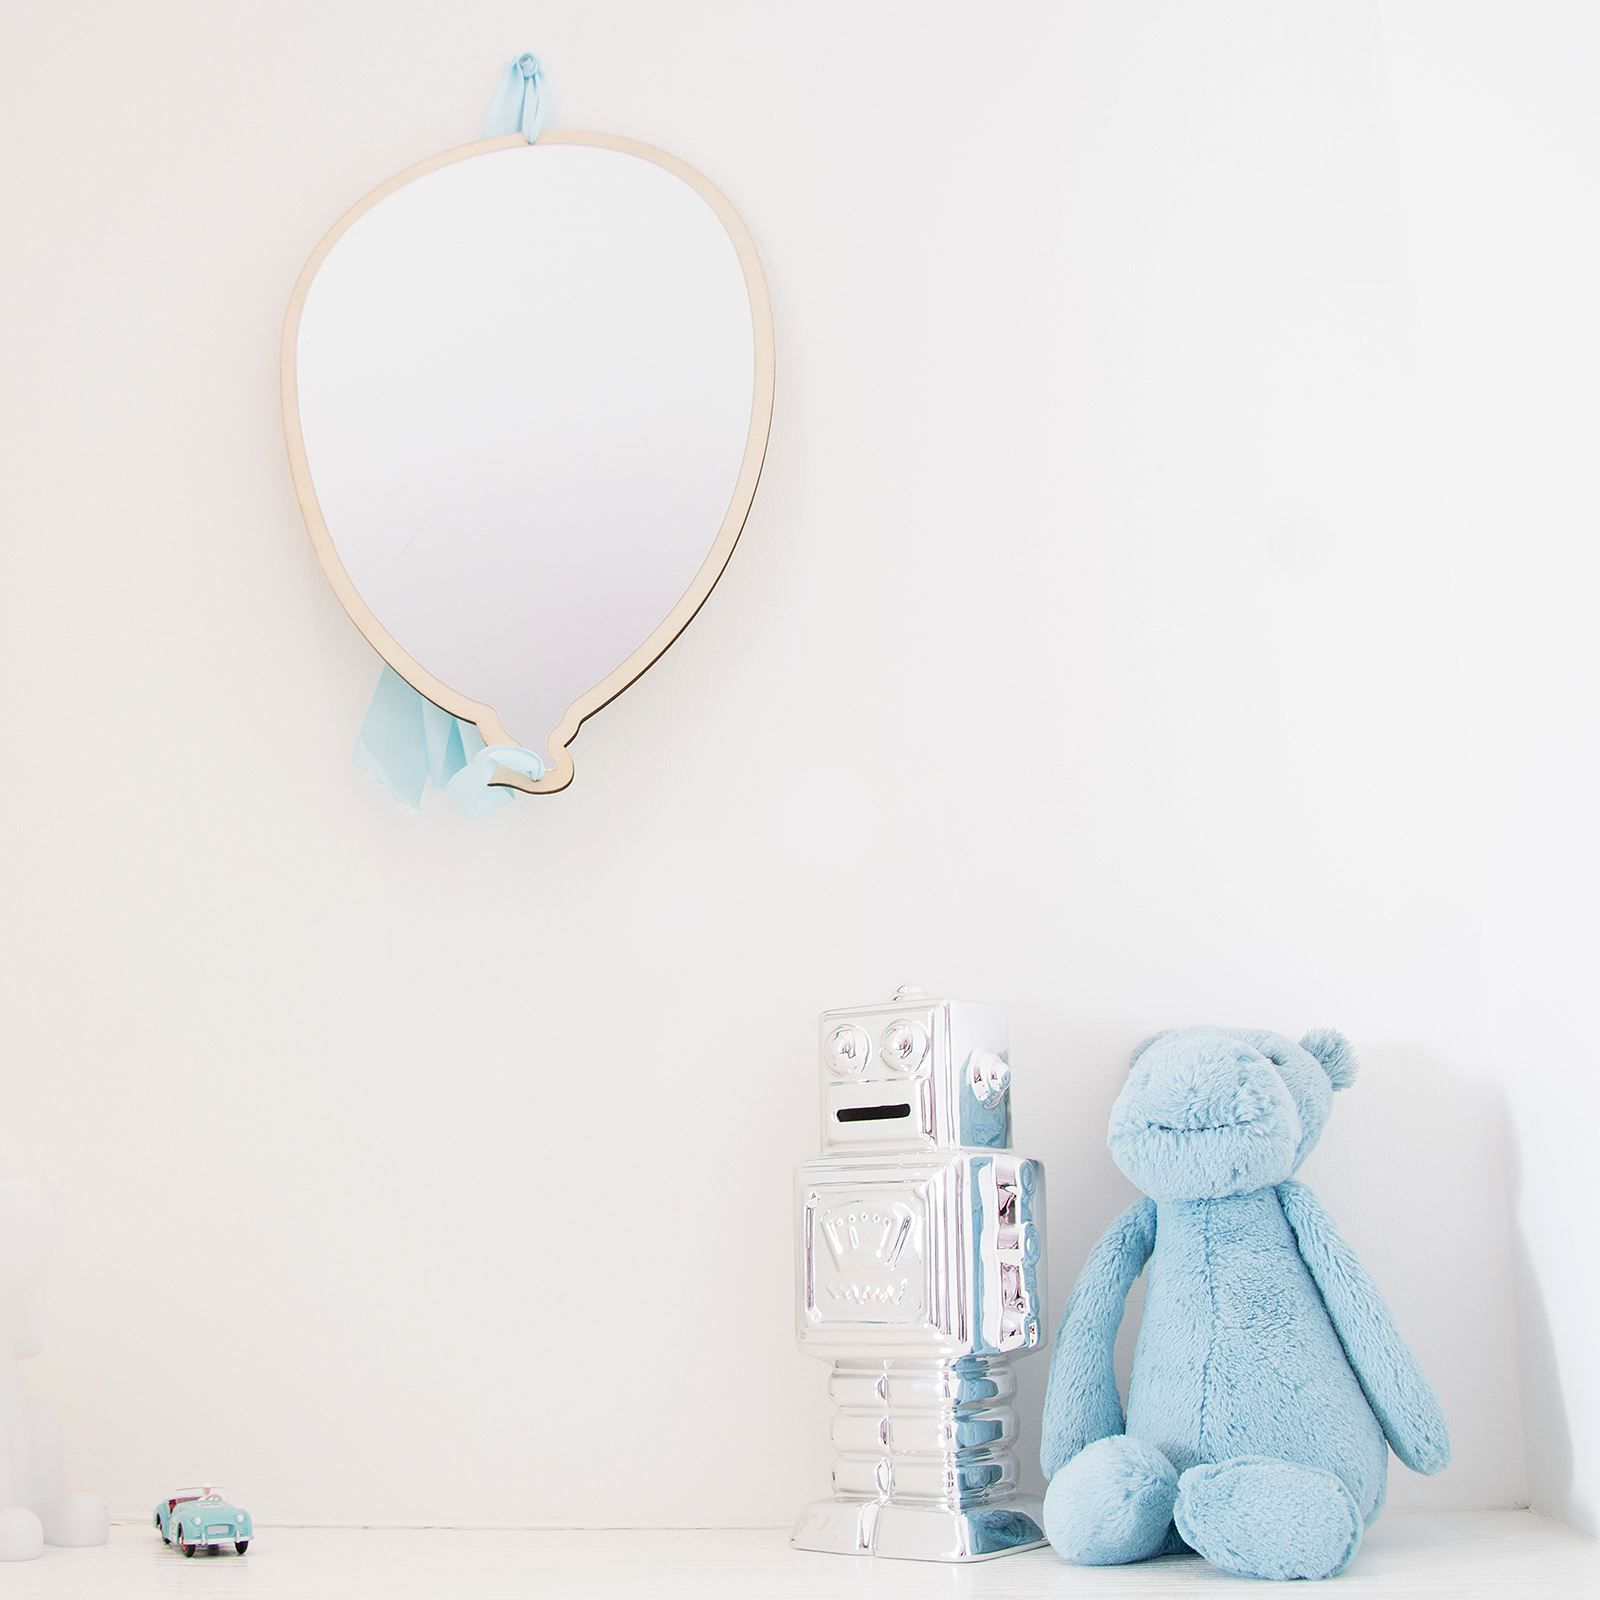 Well Known Childrens Wall Mirrors For Details About Children's Room Wall Decor Mirror Baloon Kids Bedroom Mounted  Wall Sticker Art (View 14 of 20)